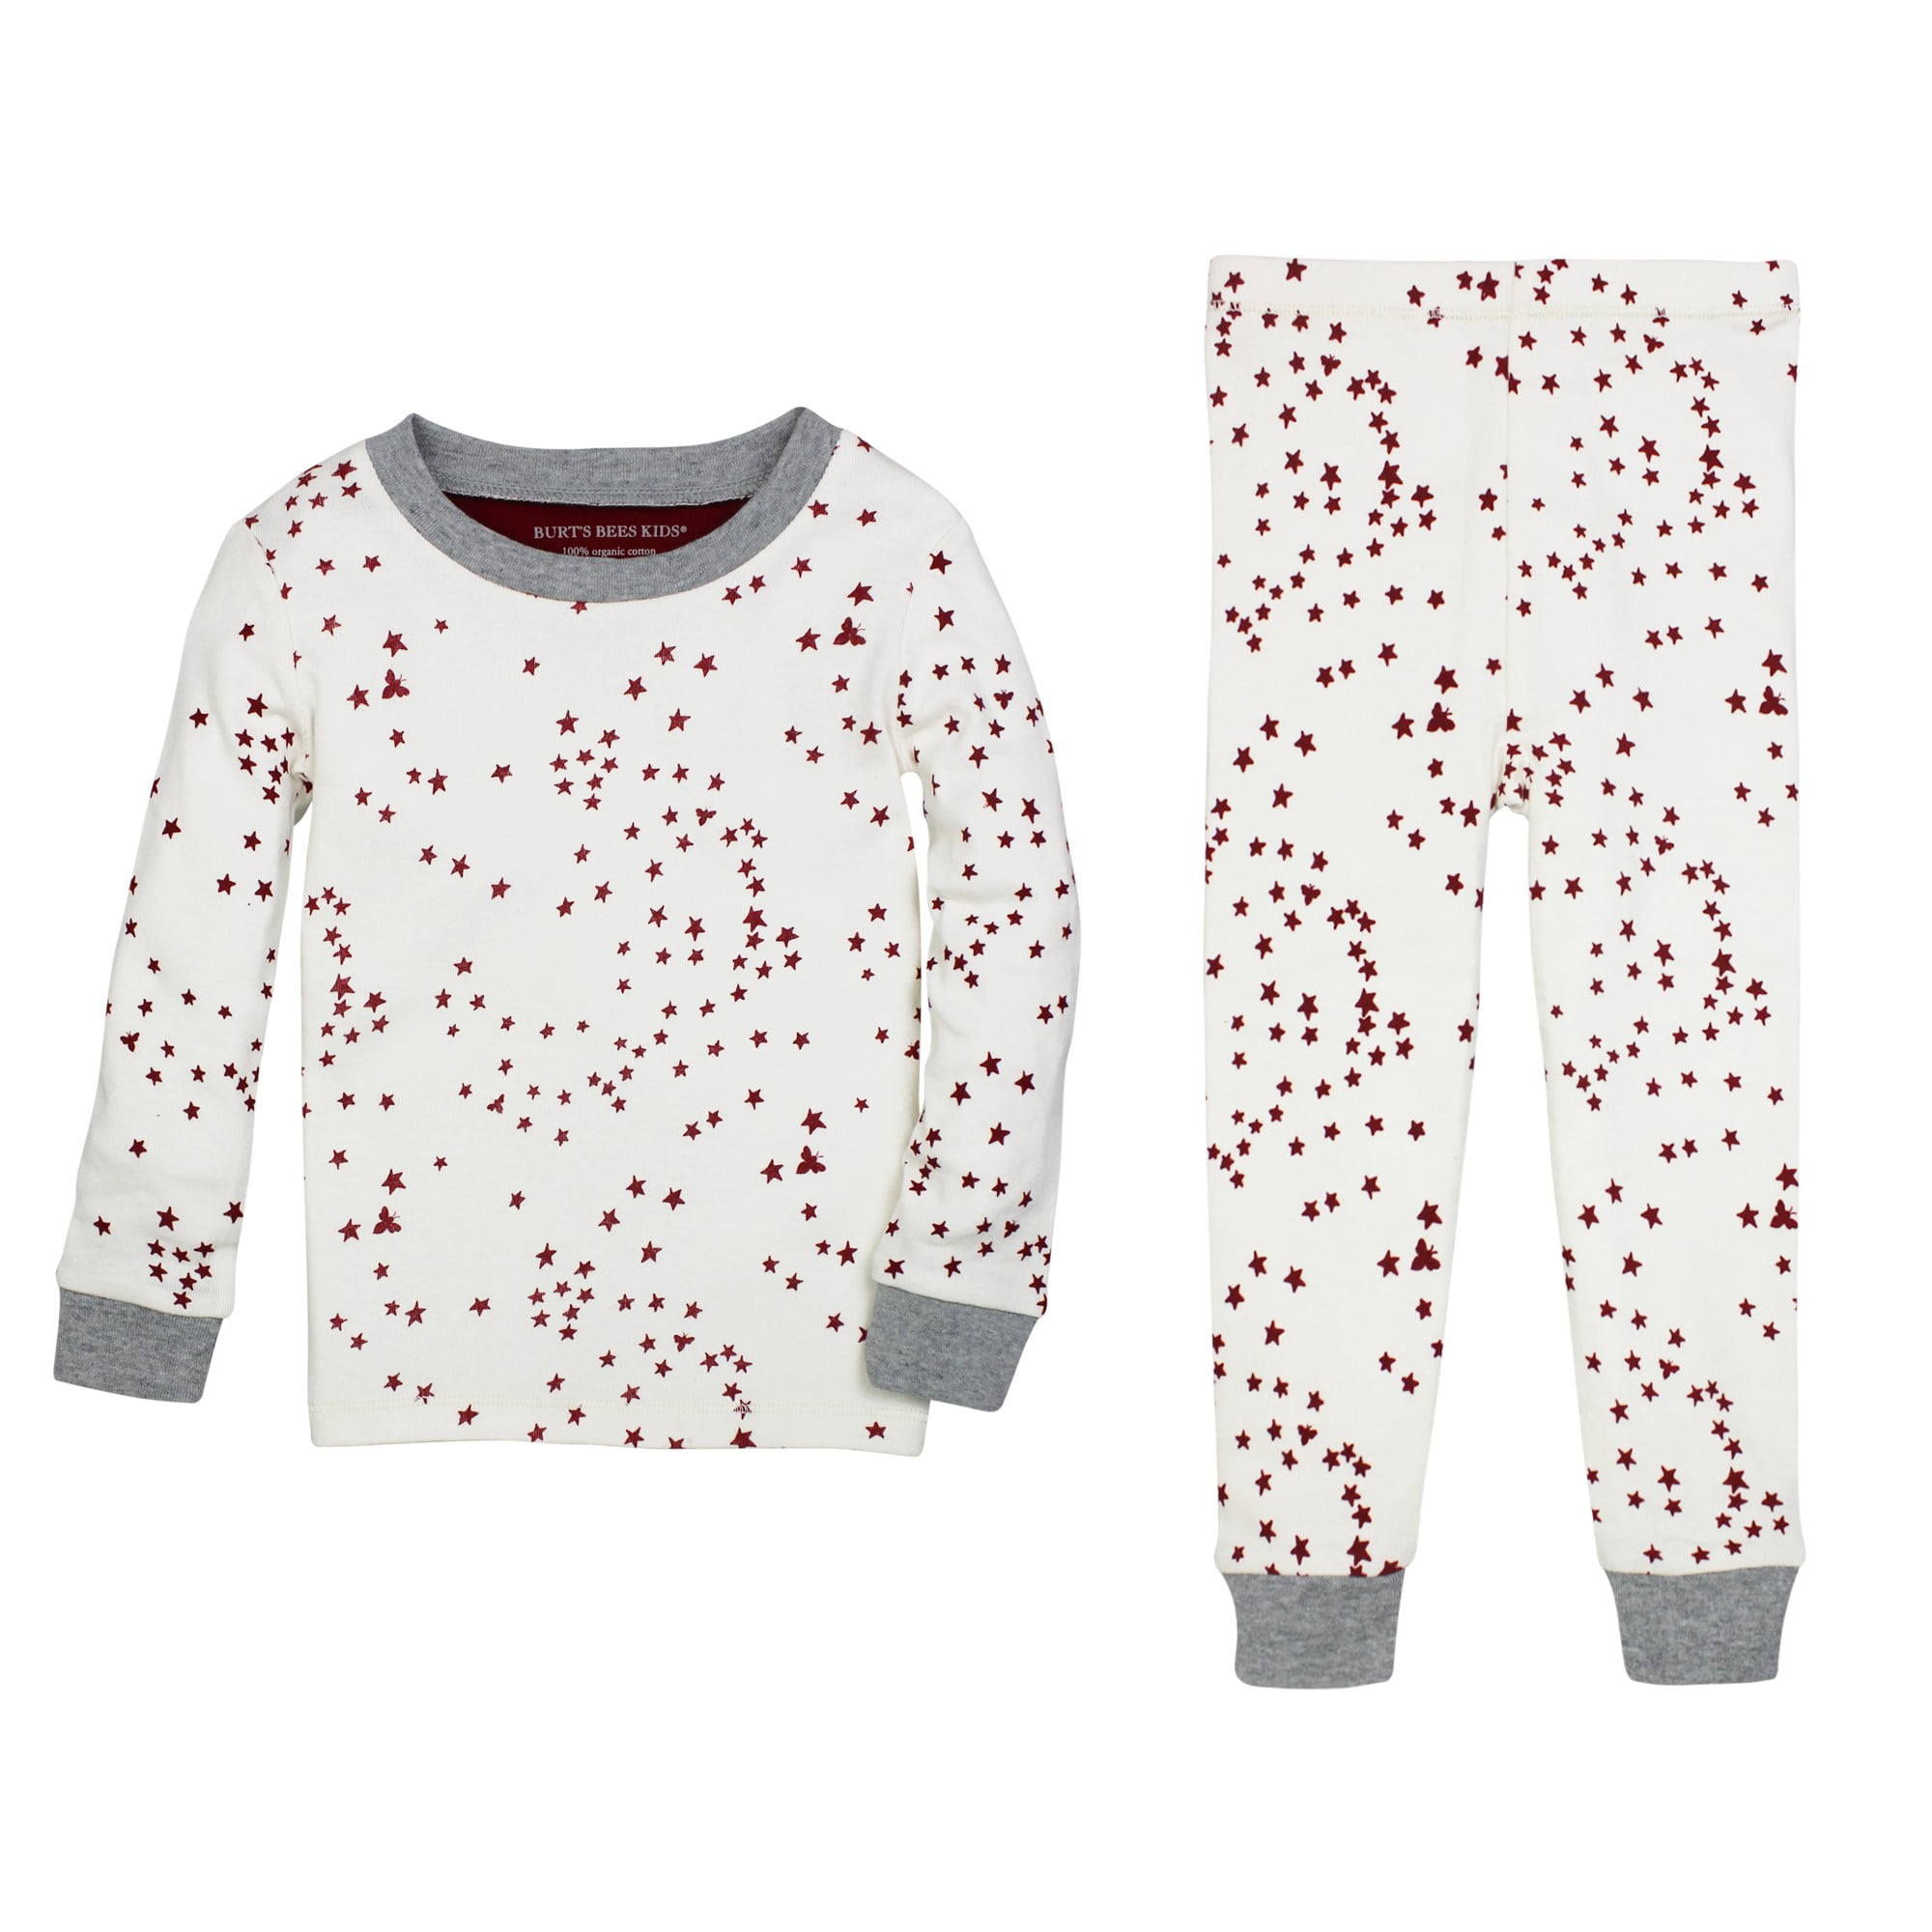 Burt's Bees Baby PJ Set with Ornament - Rugby Stripe - Cranberry - 4T